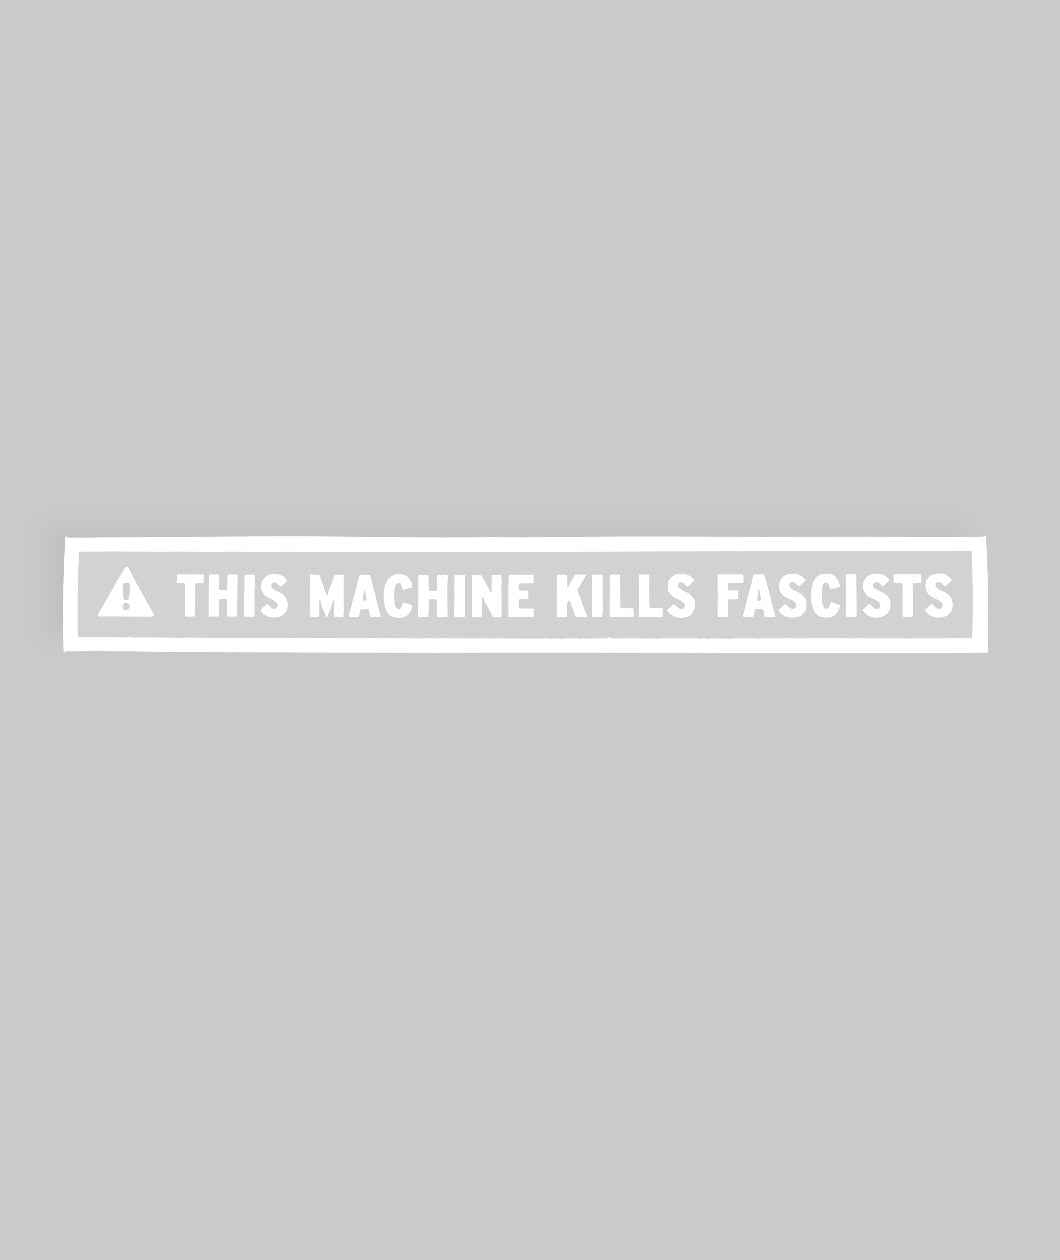 Long rectangular sticker with white border surrounding a white triangle with an exclamation point in the center of it followed by “This Machine Kills Fascists” in white, sans serif font - from John Green